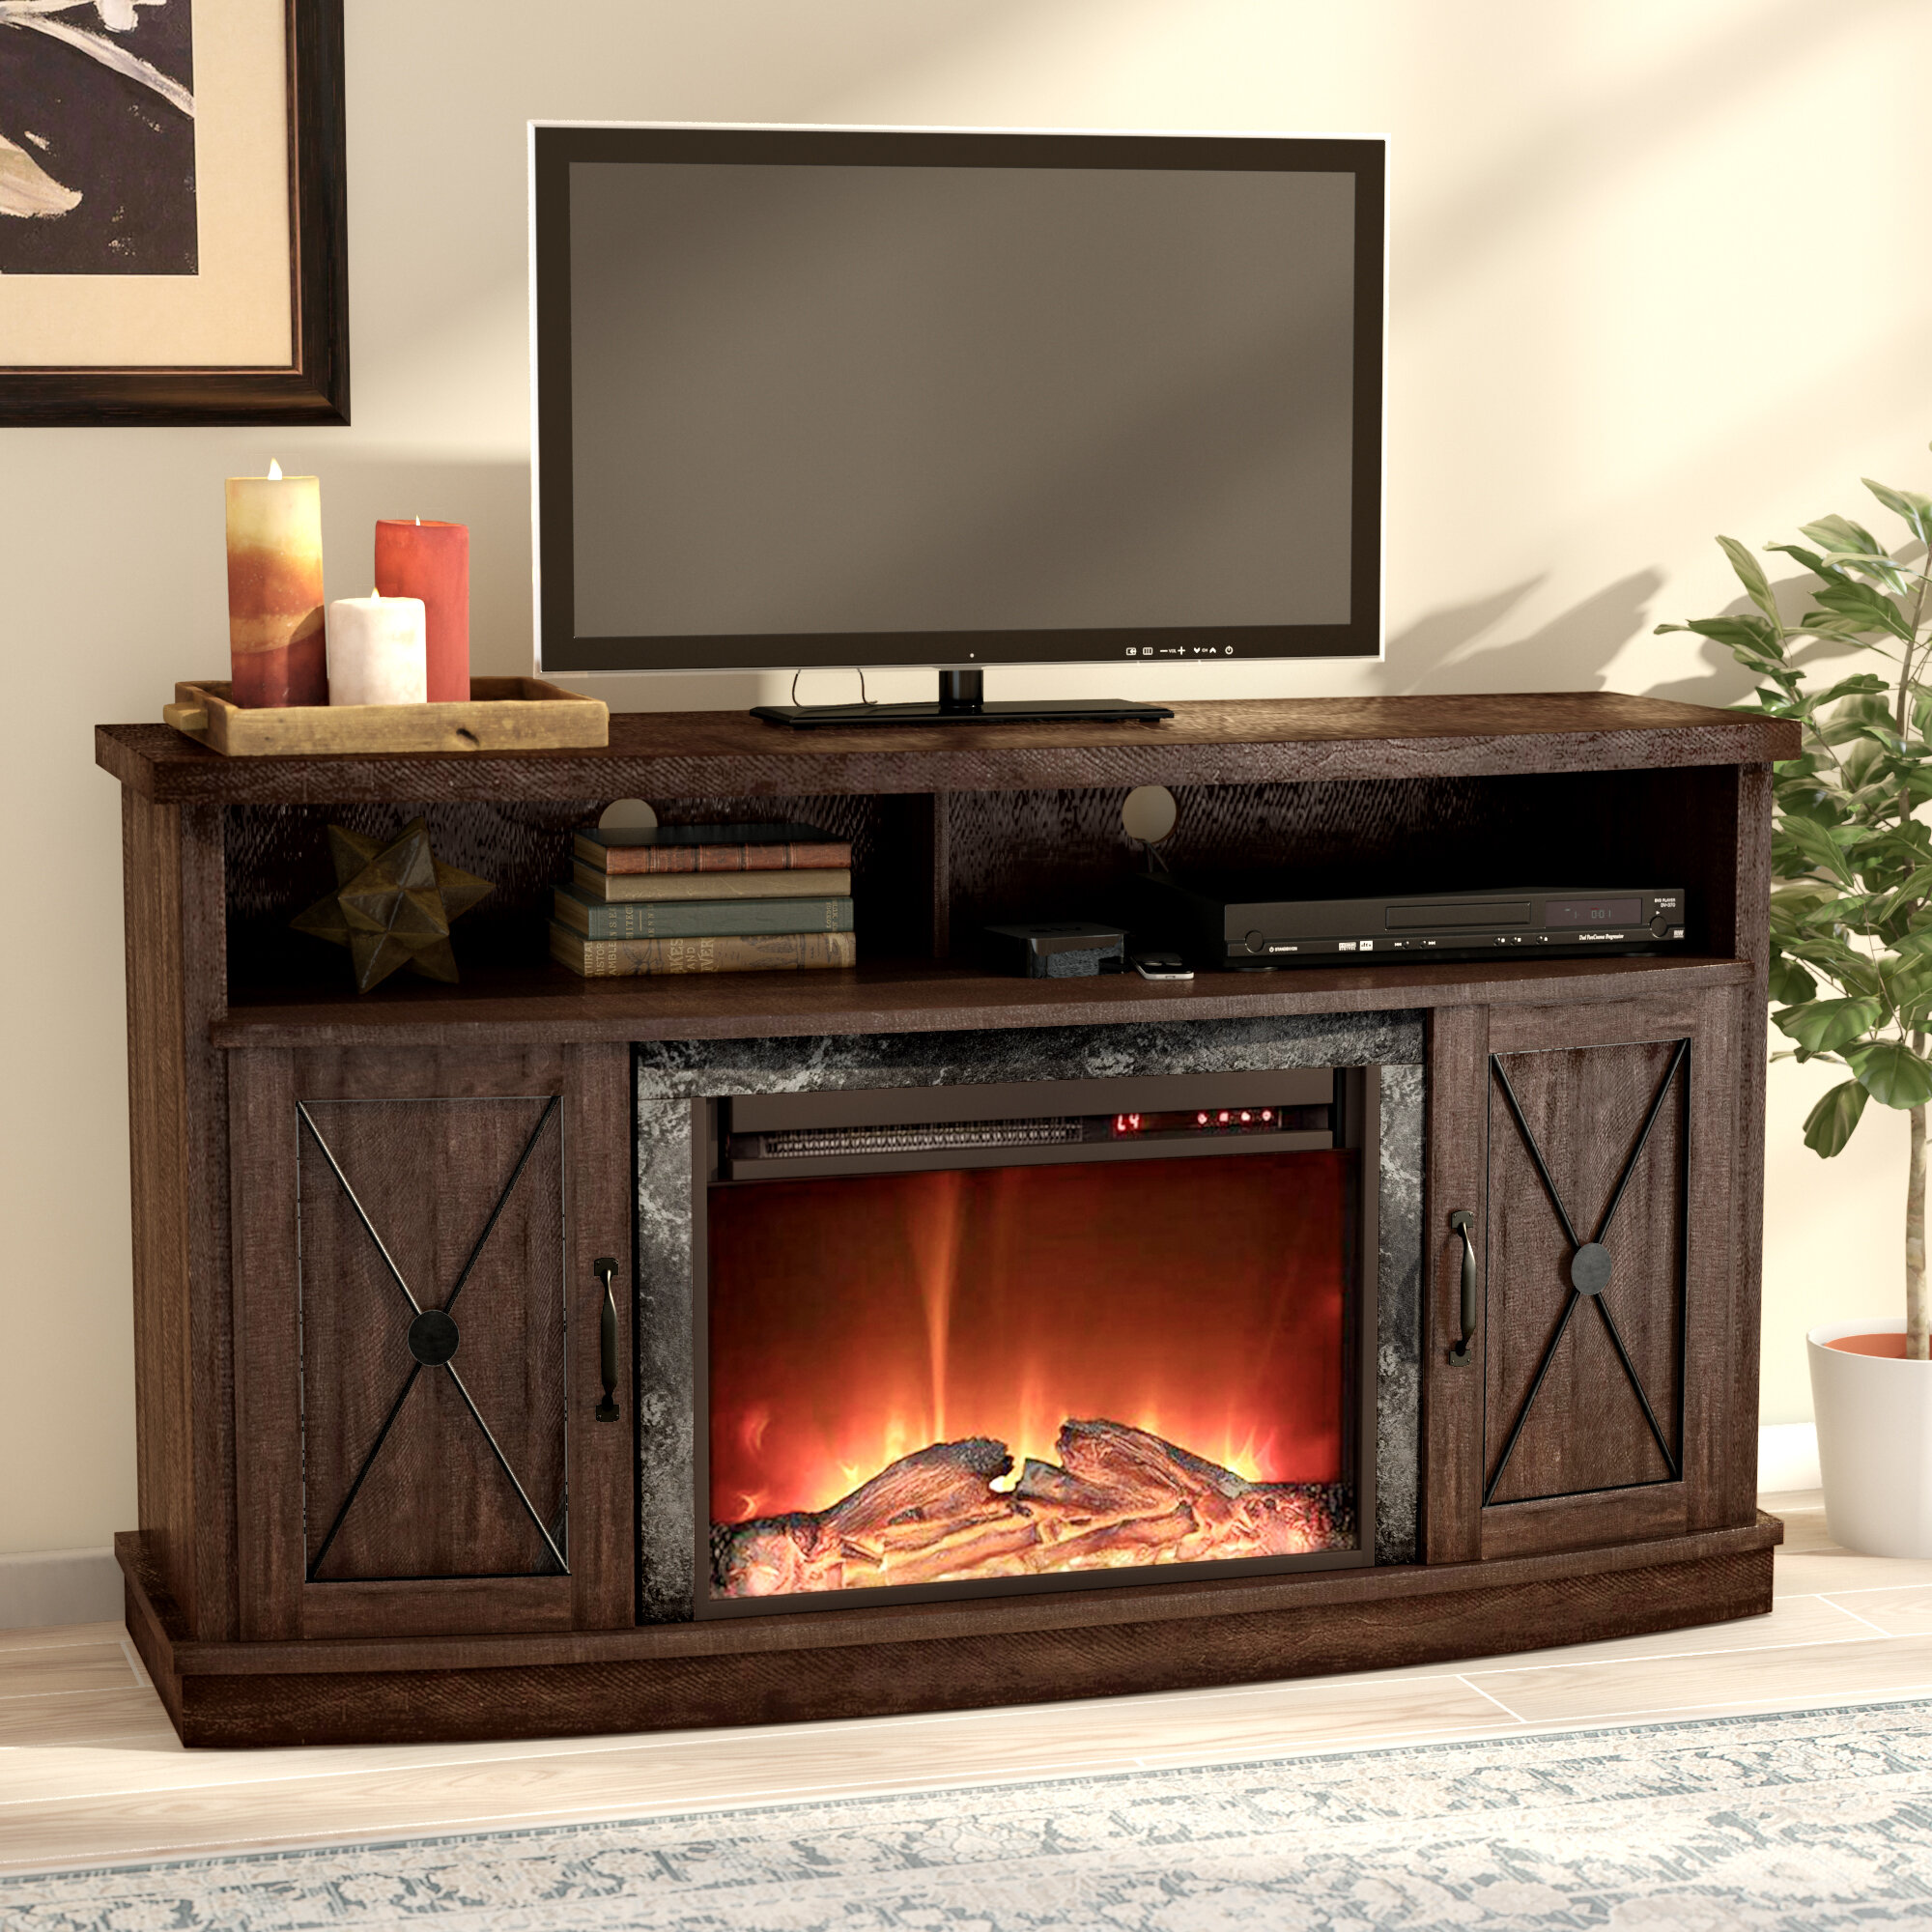 Infrared Electric Fireplace Tv Stand Best Of Media Fireplace with Remote